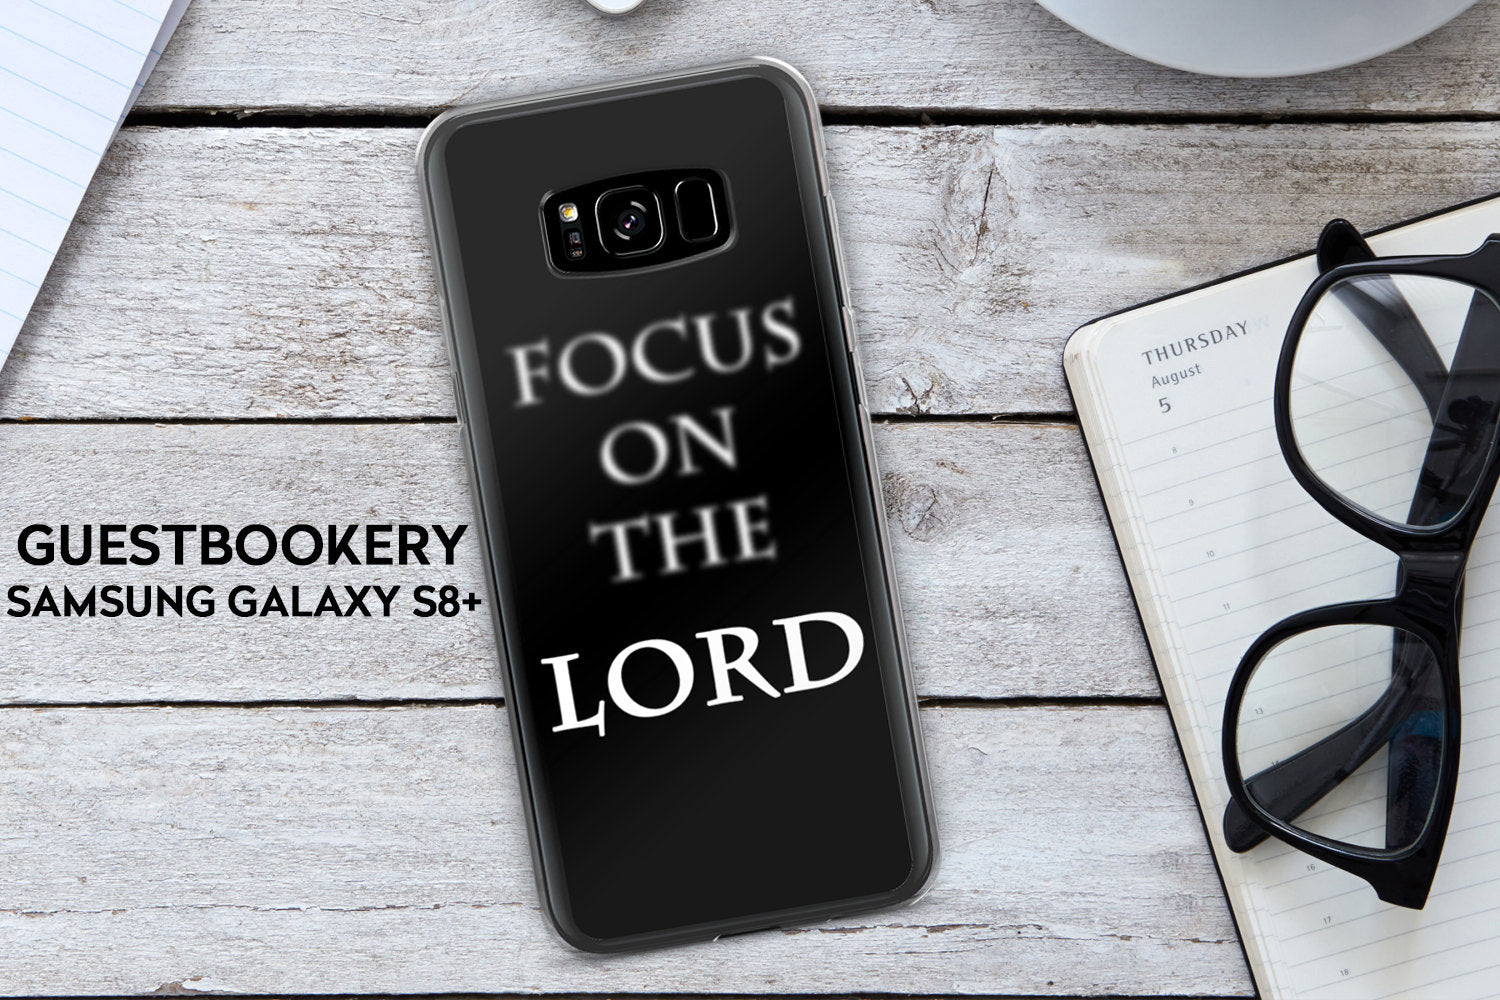 Focus on the LORD Phone Case